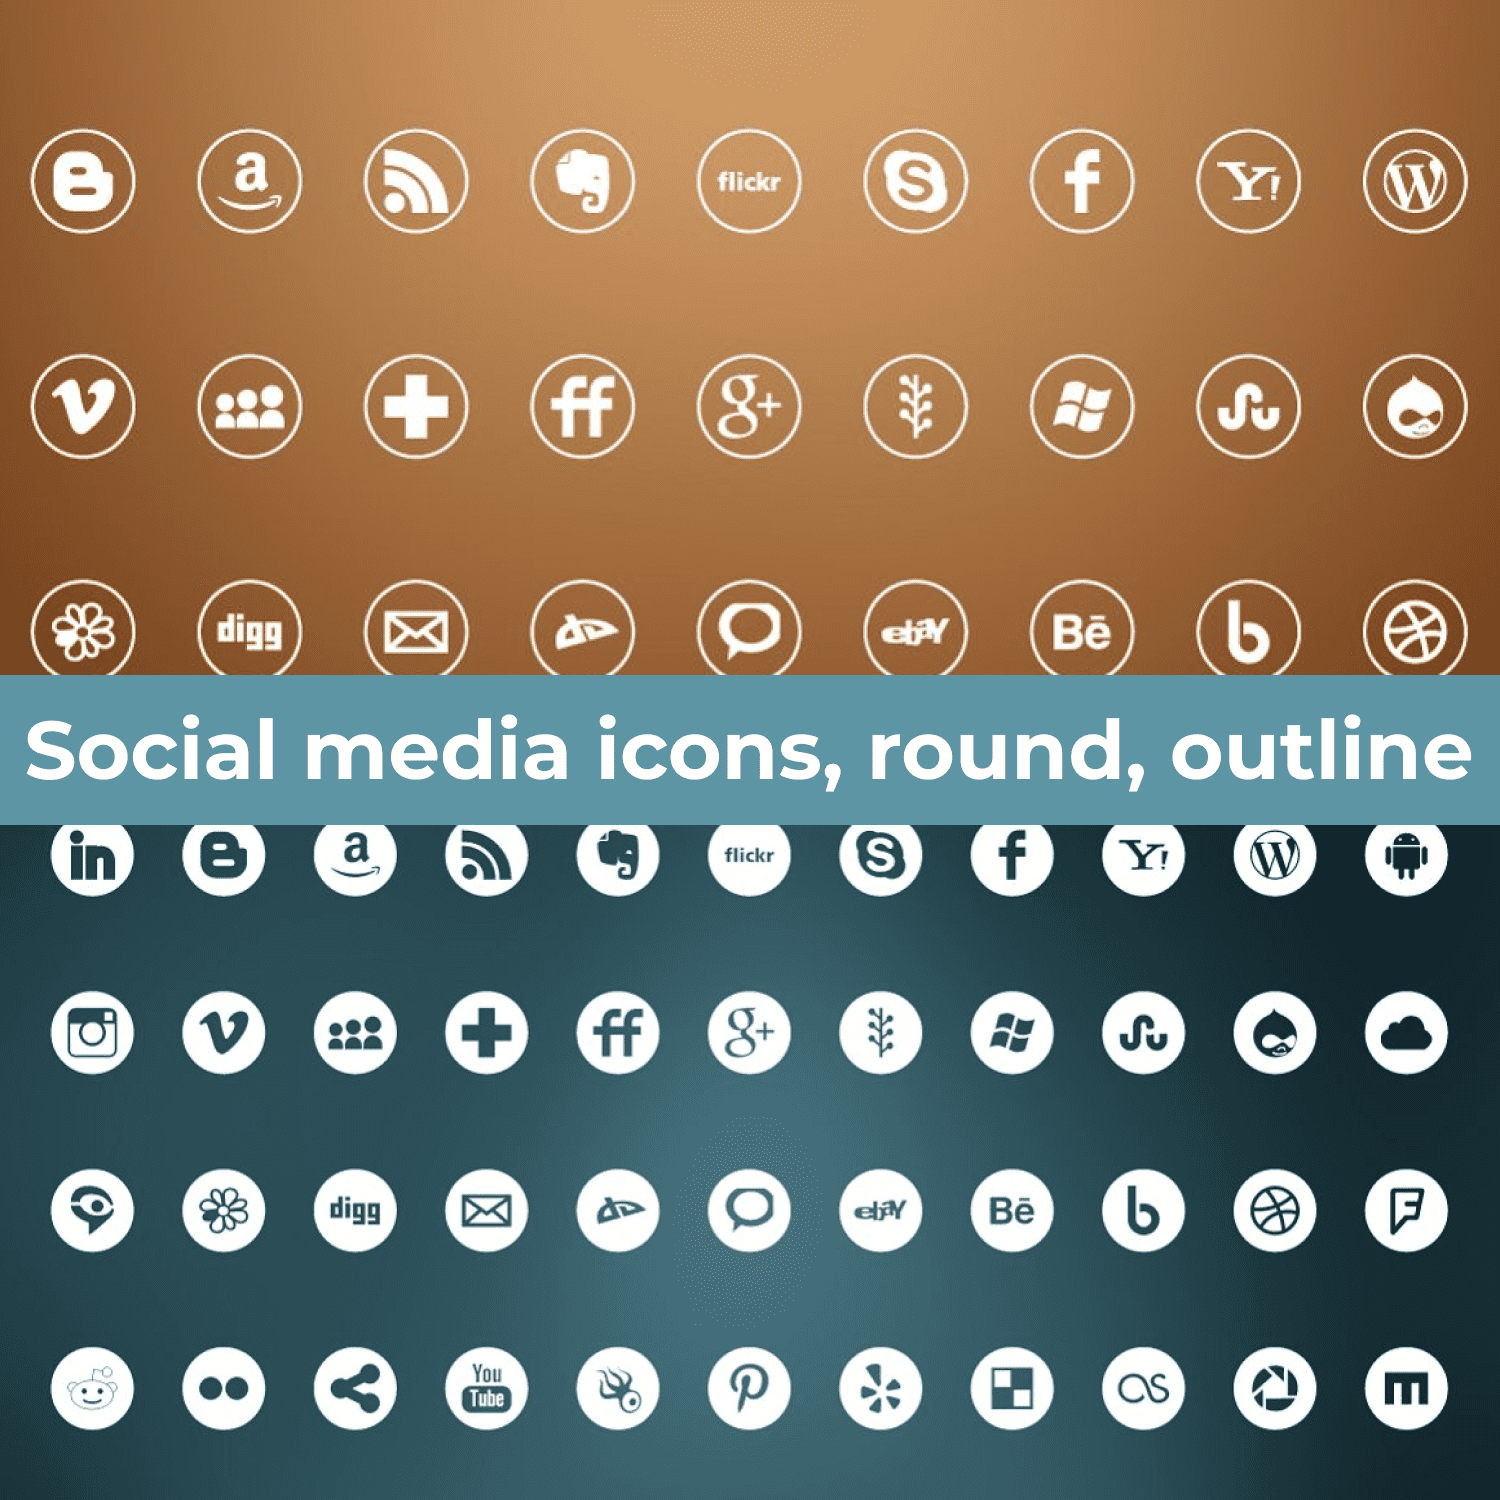 Social media icons, round, outline